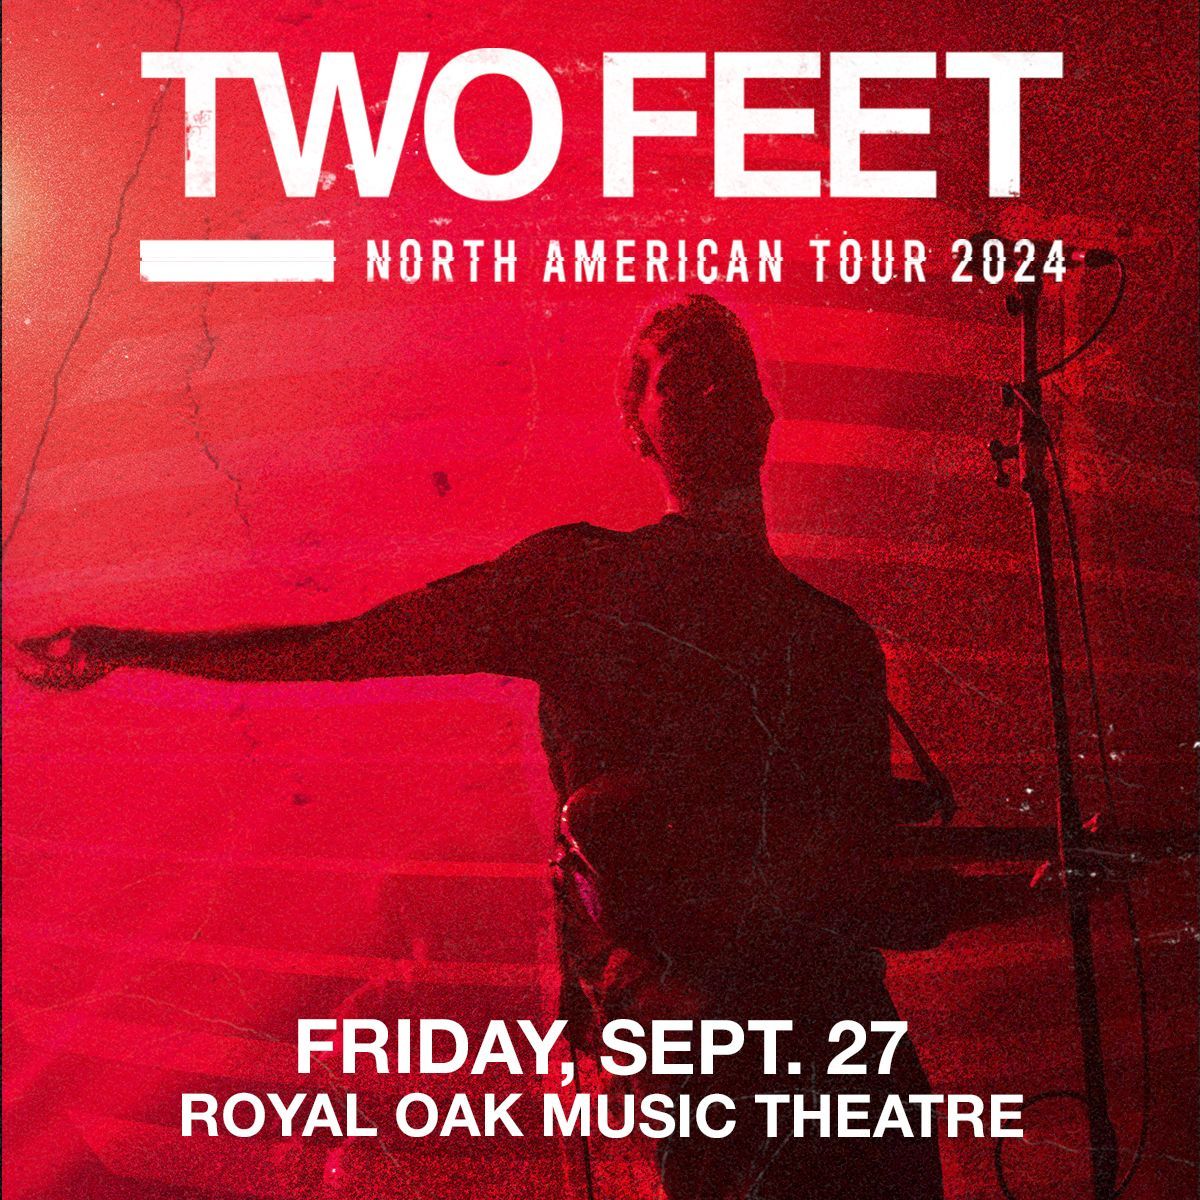 ❣️ ON SALE NOW ❣️ @TwoFeetMusic | 🗓 Fri. Sept 27 🎫: buff.ly/3xQPEMp